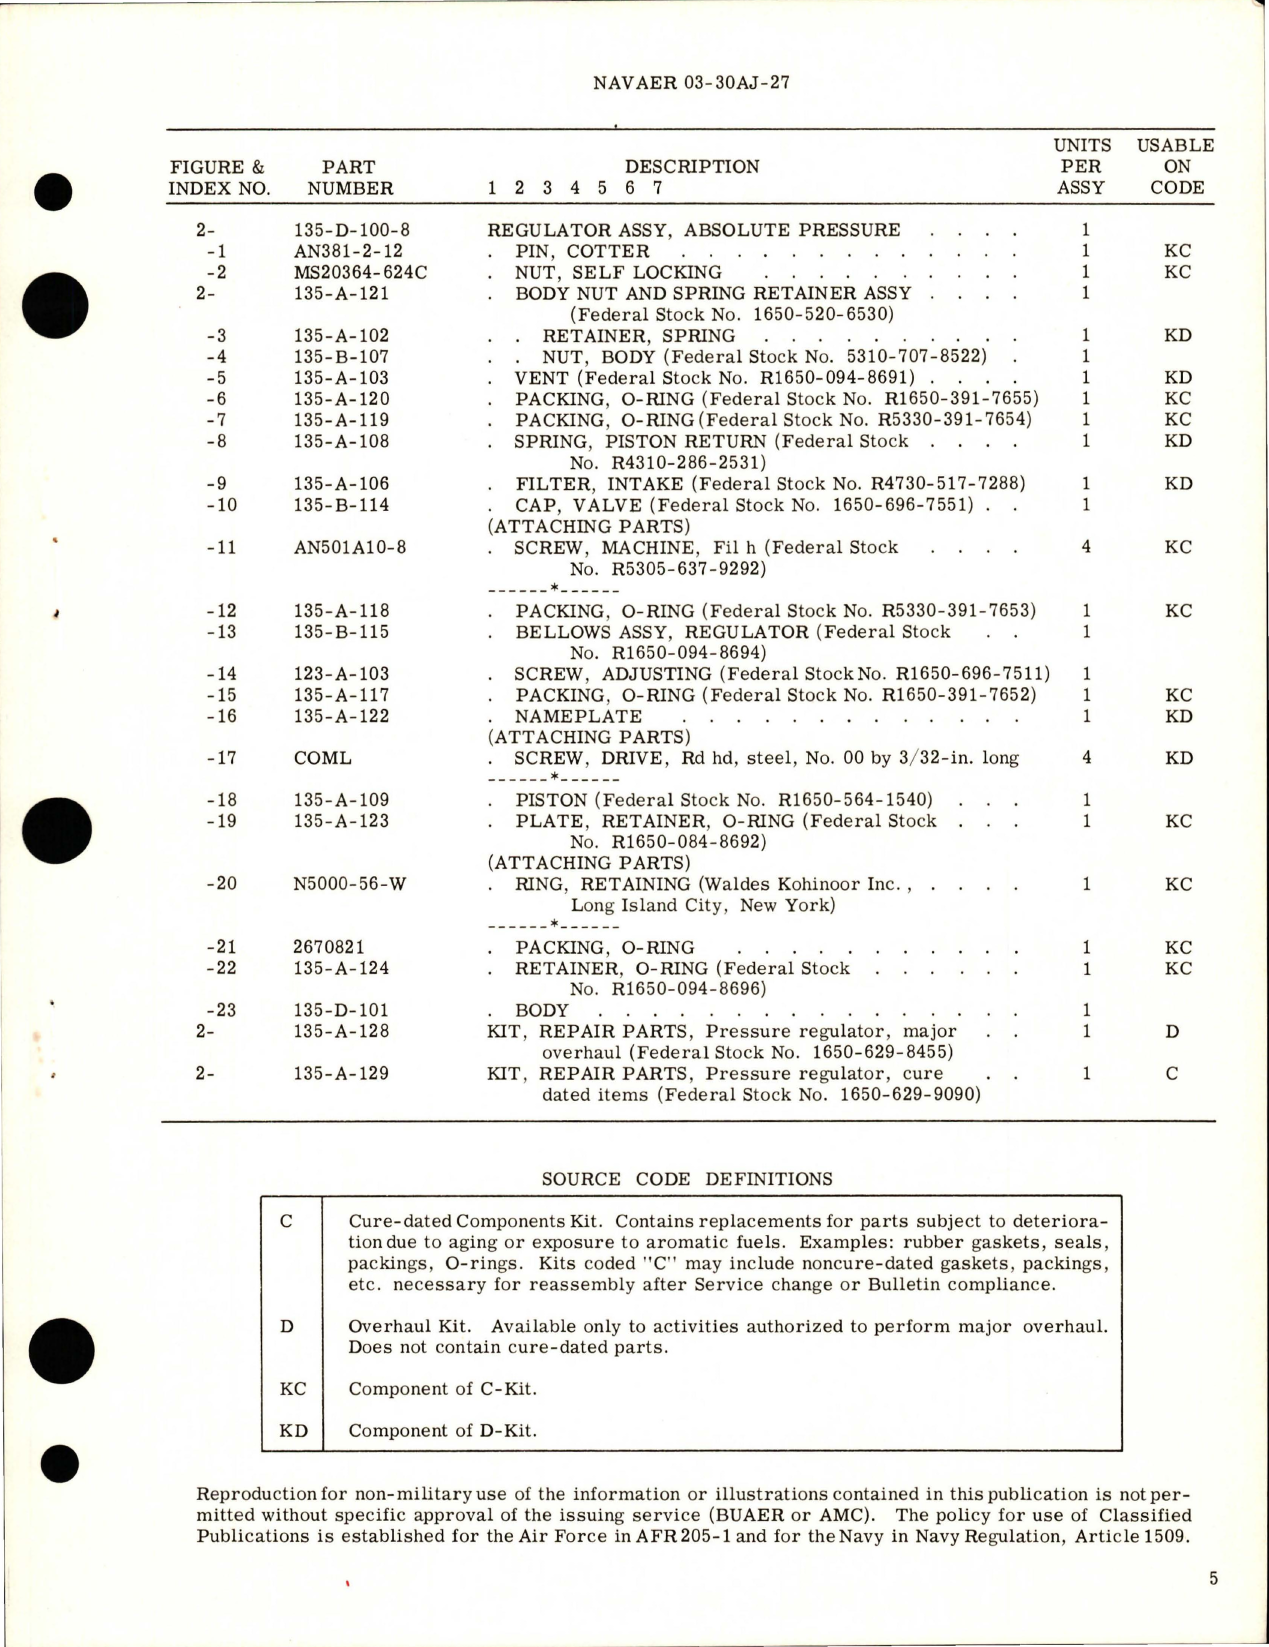 Sample page 5 from AirCorps Library document: Overhaul Instructions with Parts Breakdown for Absolute Pressure Regulator - Model 135-D-100-8